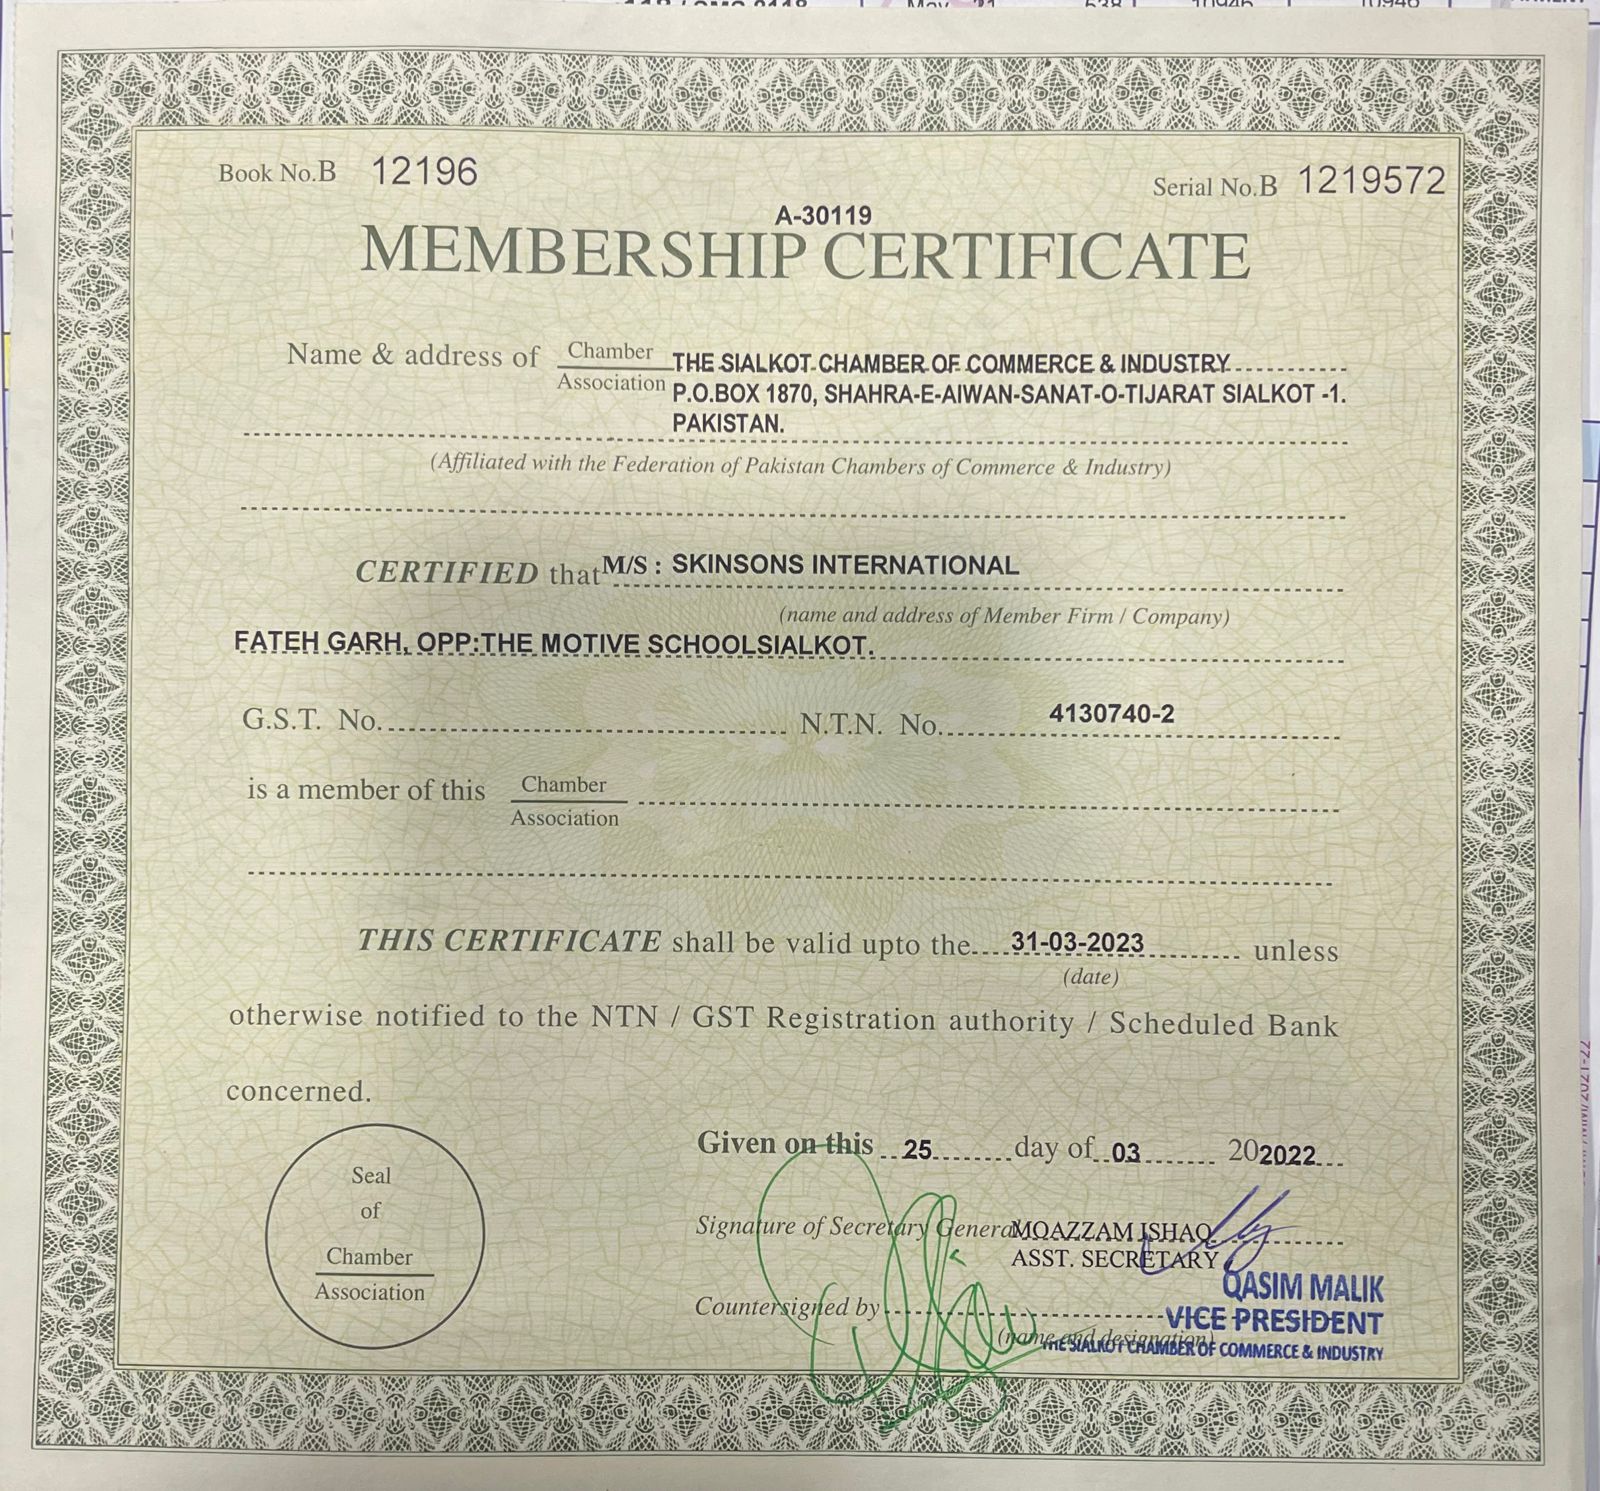 Leather Jacket Gear Sialkot Chember Certificate